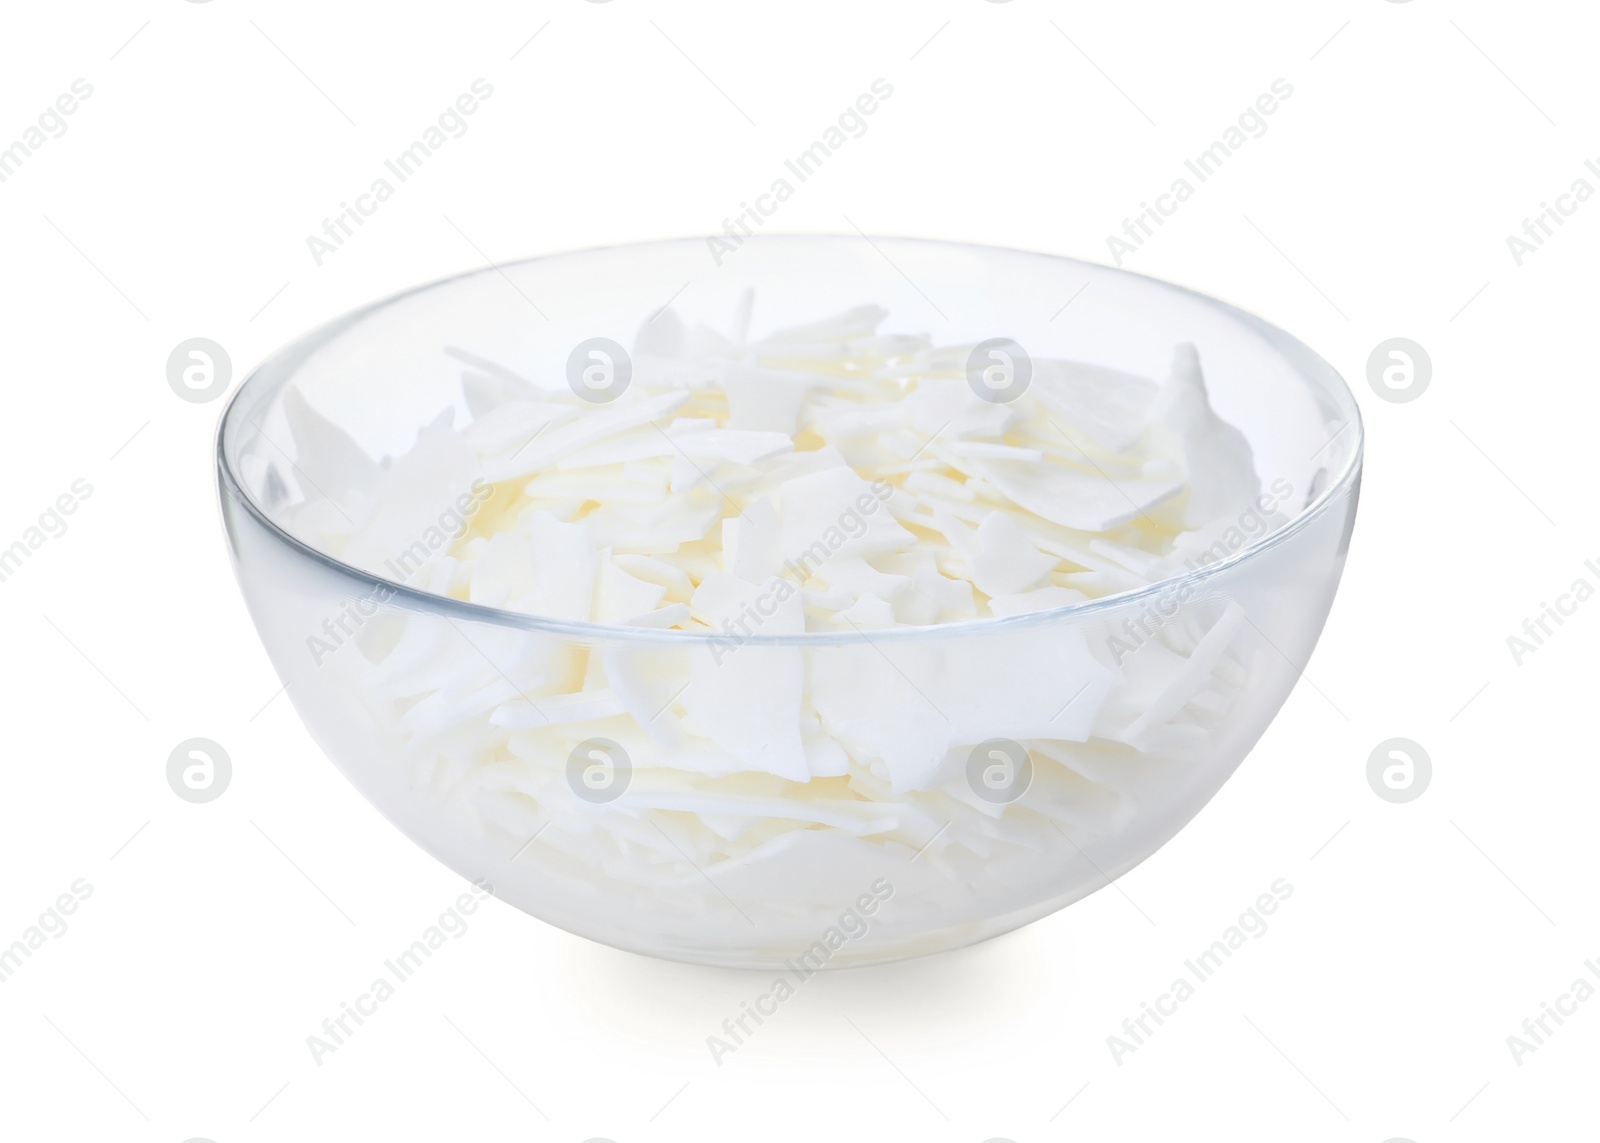 Photo of Wax flakes in glass bowl on white background. Homemade candle material